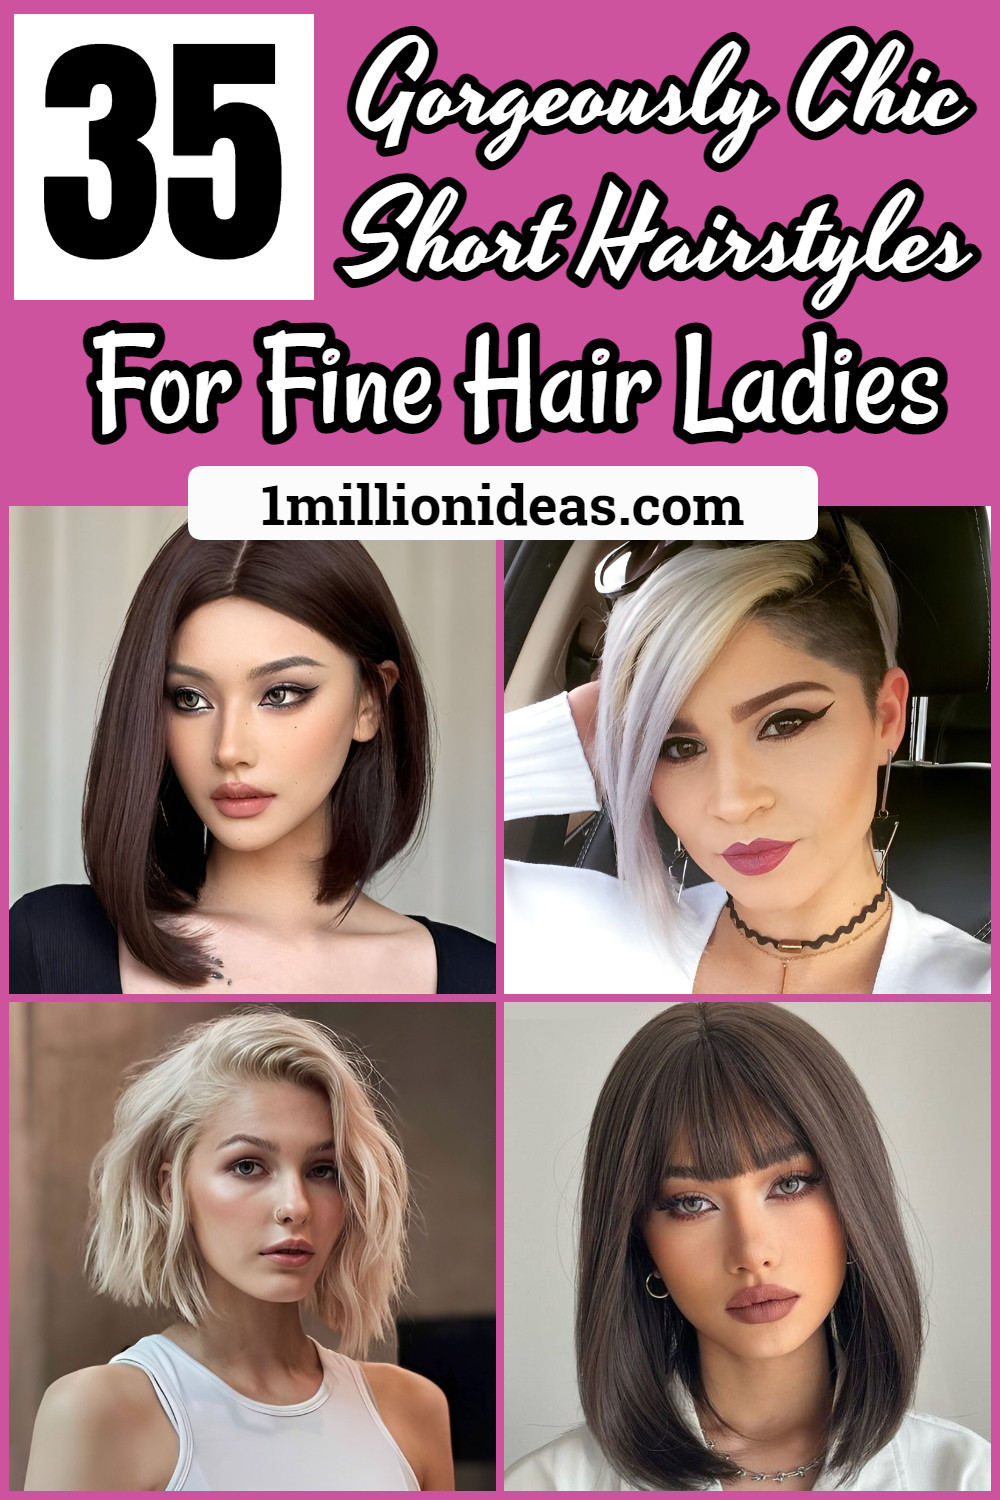 35 Gorgeously Chic Short Hairstyles For Fine Hair Ladies - 221